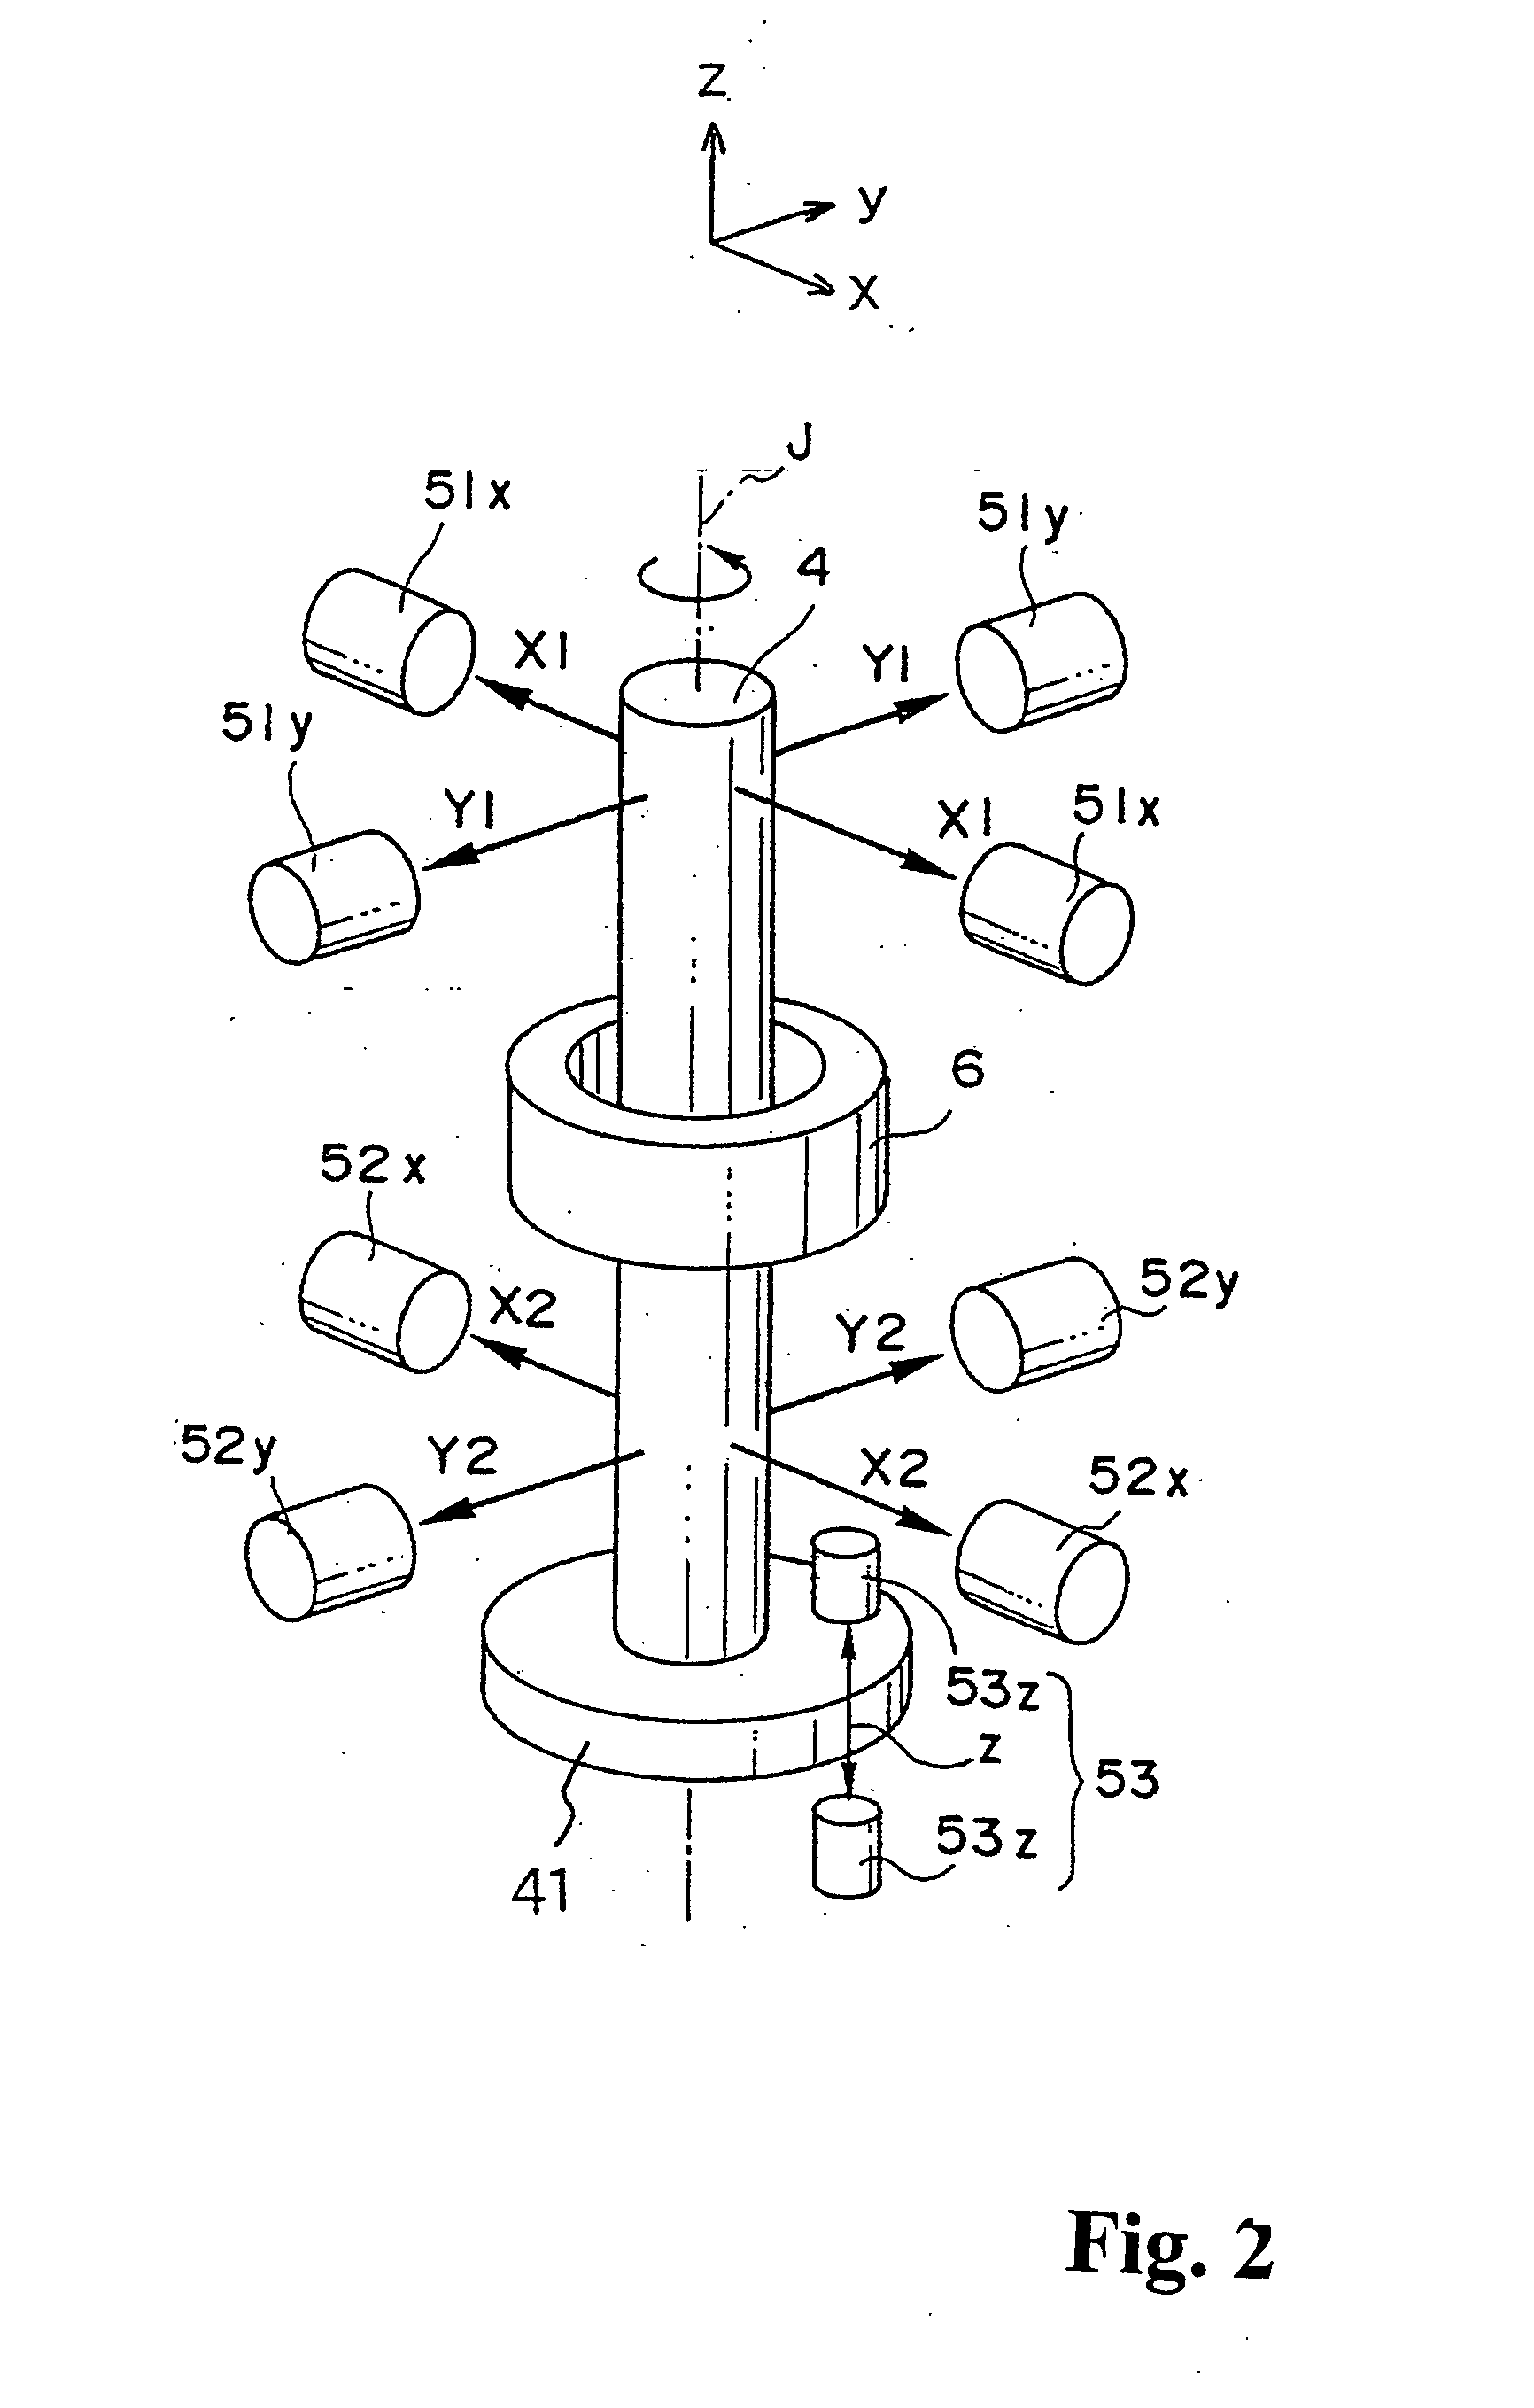 Magnetic bearing control device